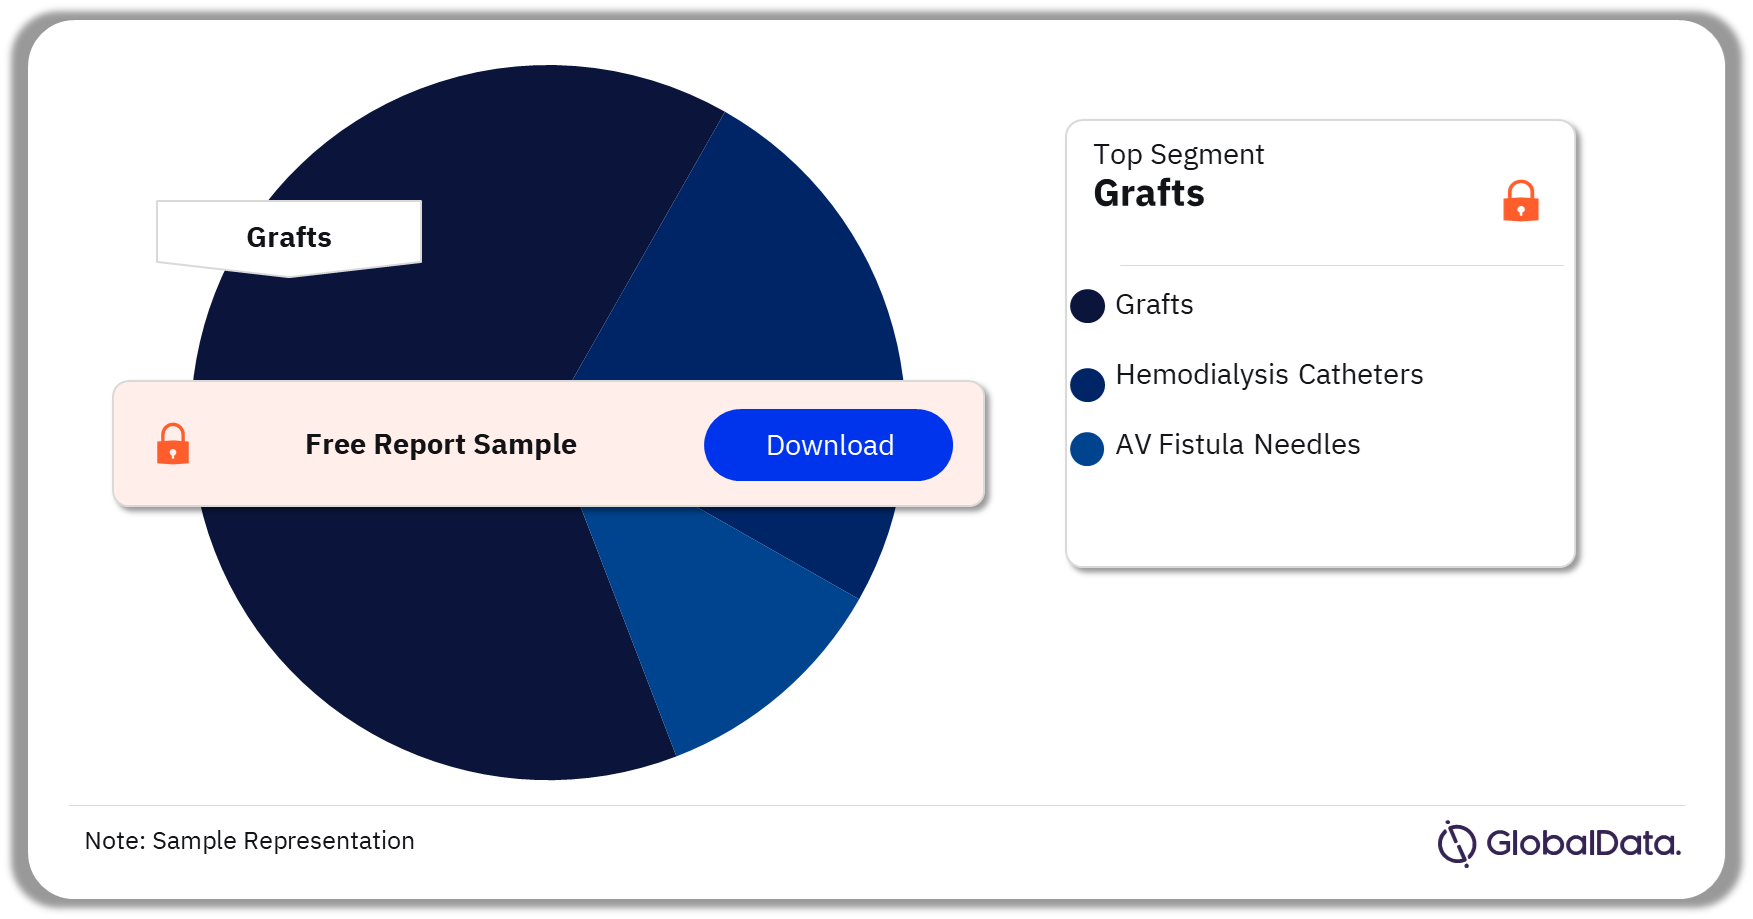 Vascular Access Devices for Hemodialysis Pipeline Market Analysis by Segments, 2023 (%)